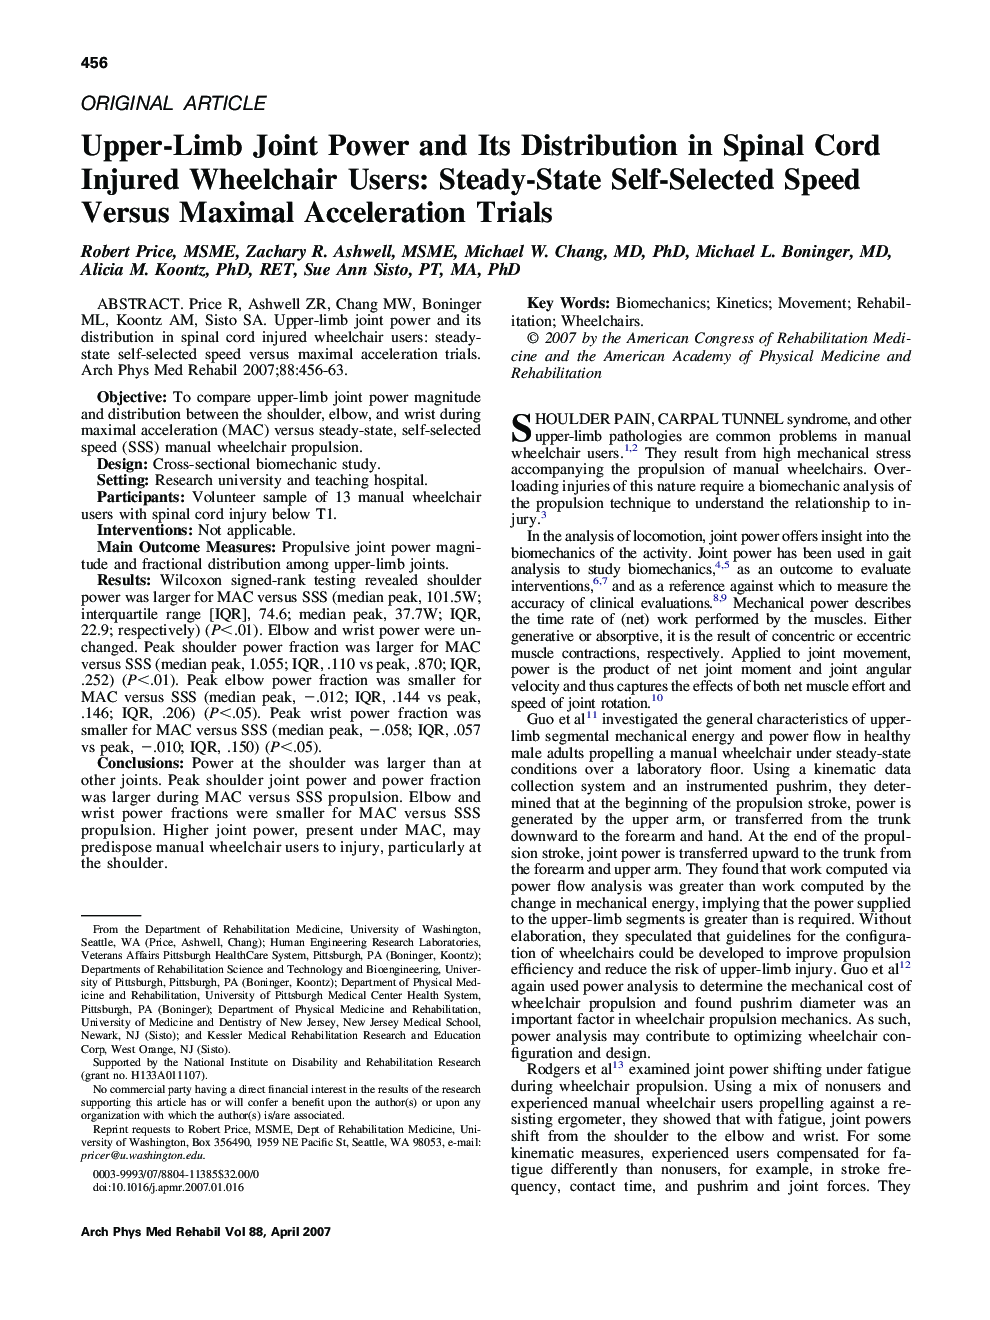 Upper-Limb Joint Power and Its Distribution in Spinal Cord Injured Wheelchair Users: Steady-State Self-Selected Speed Versus Maximal Acceleration Trials 